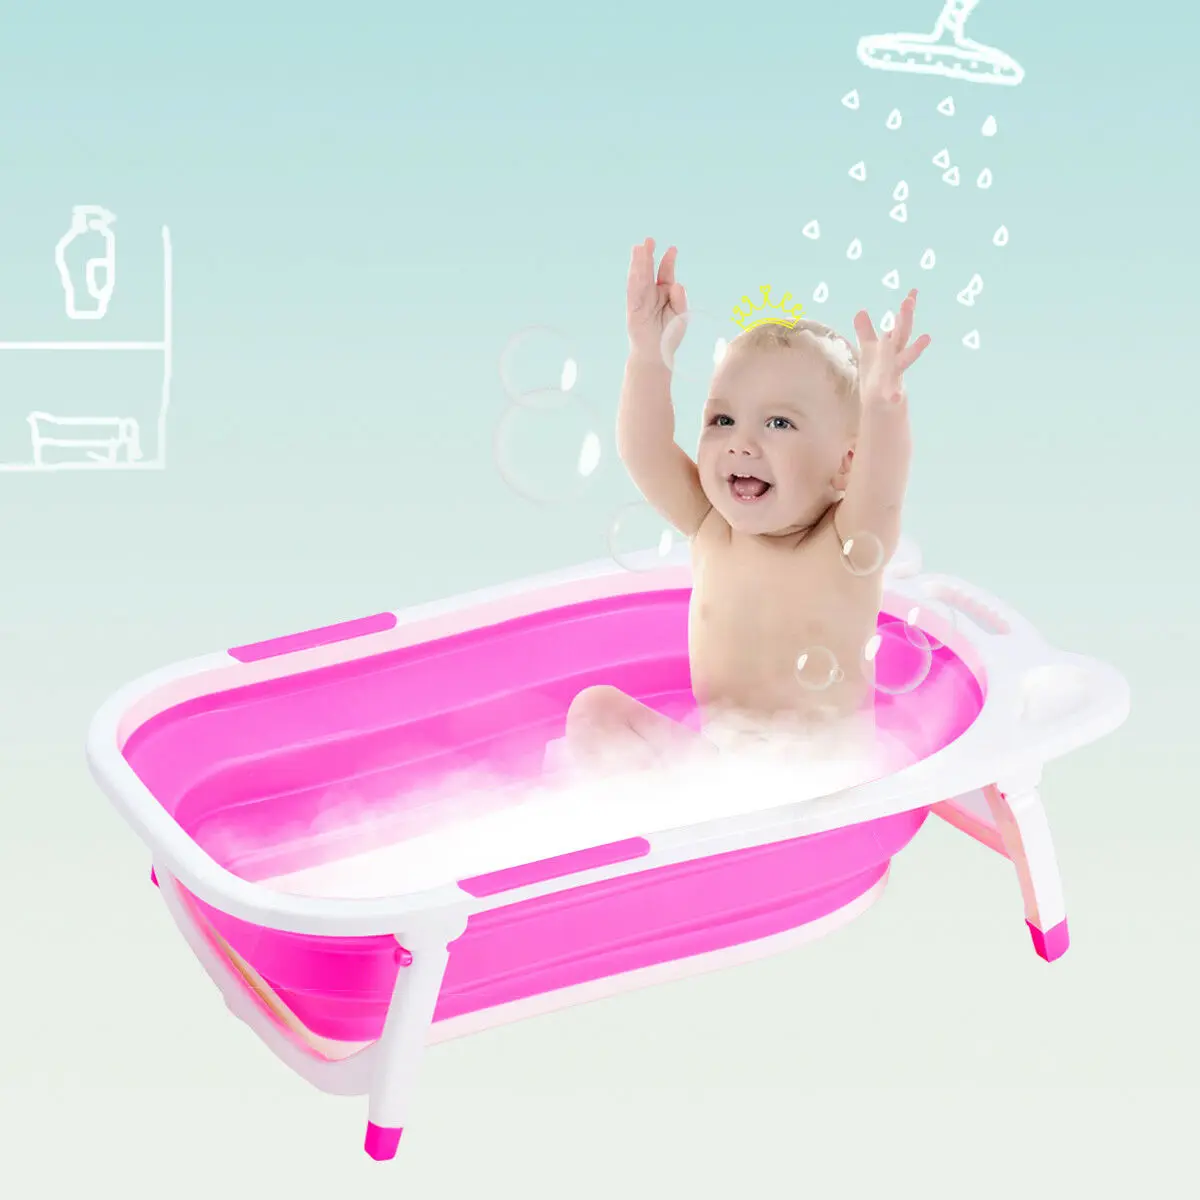 Pink Baby Folding Bathtub Infant Collapsible Portable Shower Basin w/ Block